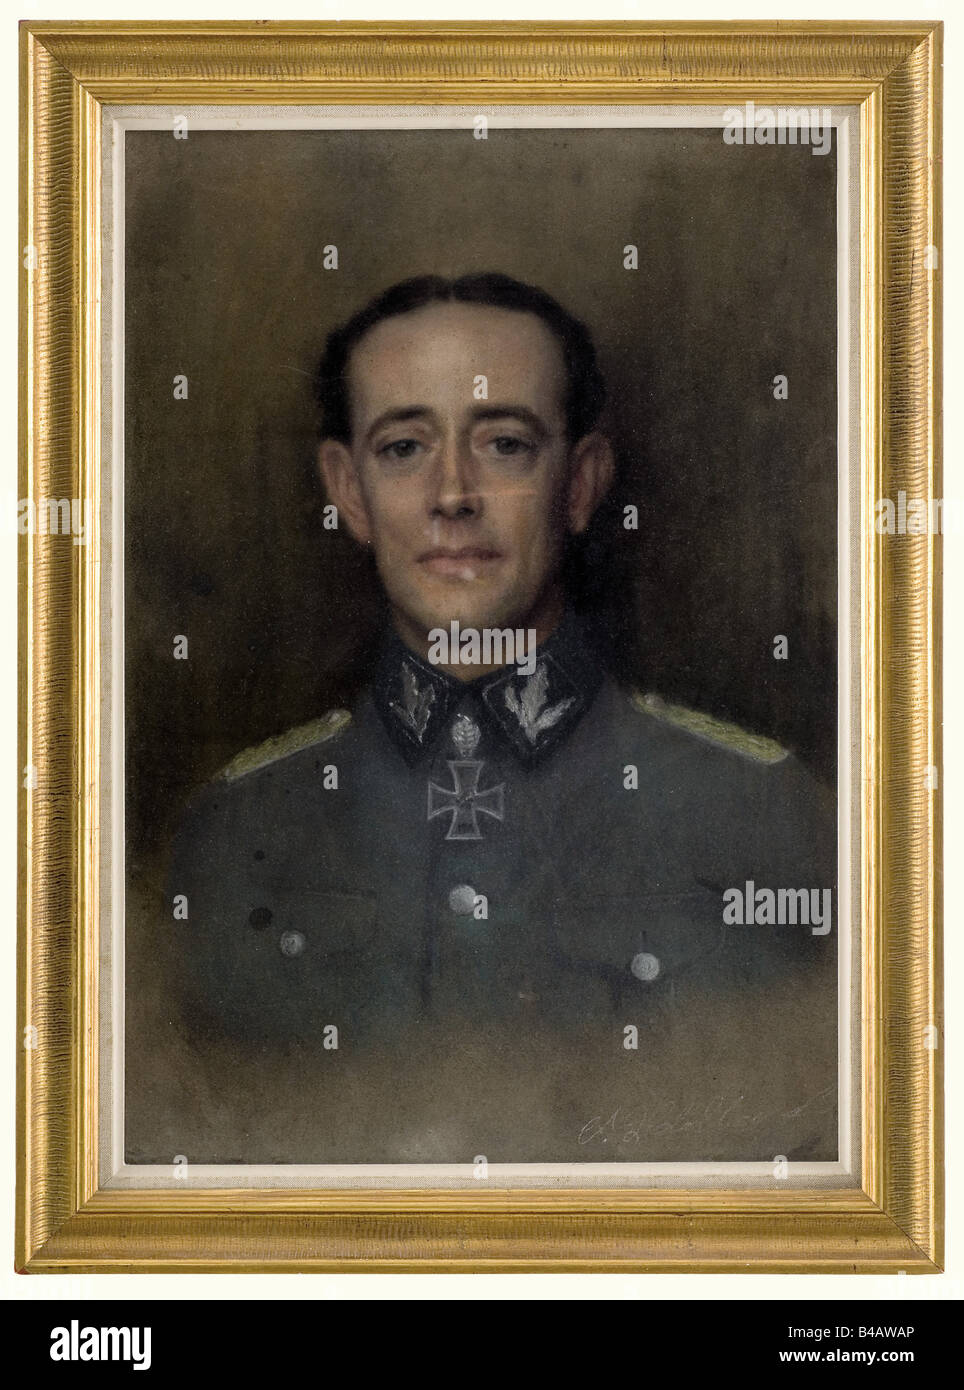 A portrait of Brigade Leader August Friedrich Zehender (1903 - 1945), pastel chalk on cardboard. Zehender wearing the Knight's Cross with Oak Leaves, facing the onlooker. In glazed, gold/bronze coloured trim frame. Framed 56 x 75 cm. Intensive portrait of high artistic value. Friedrich Zehender received the Oak Leaves on 1st February 1945. He died only ten days later in the Battle of Budapest, when he and the rest of his 22nd SS Volunteer Cavalry Division 'Maria Theresia' attempted to break out of the city.' people, 1930s, 20th century, Waffen-SS, armed divisio, Stock Photo